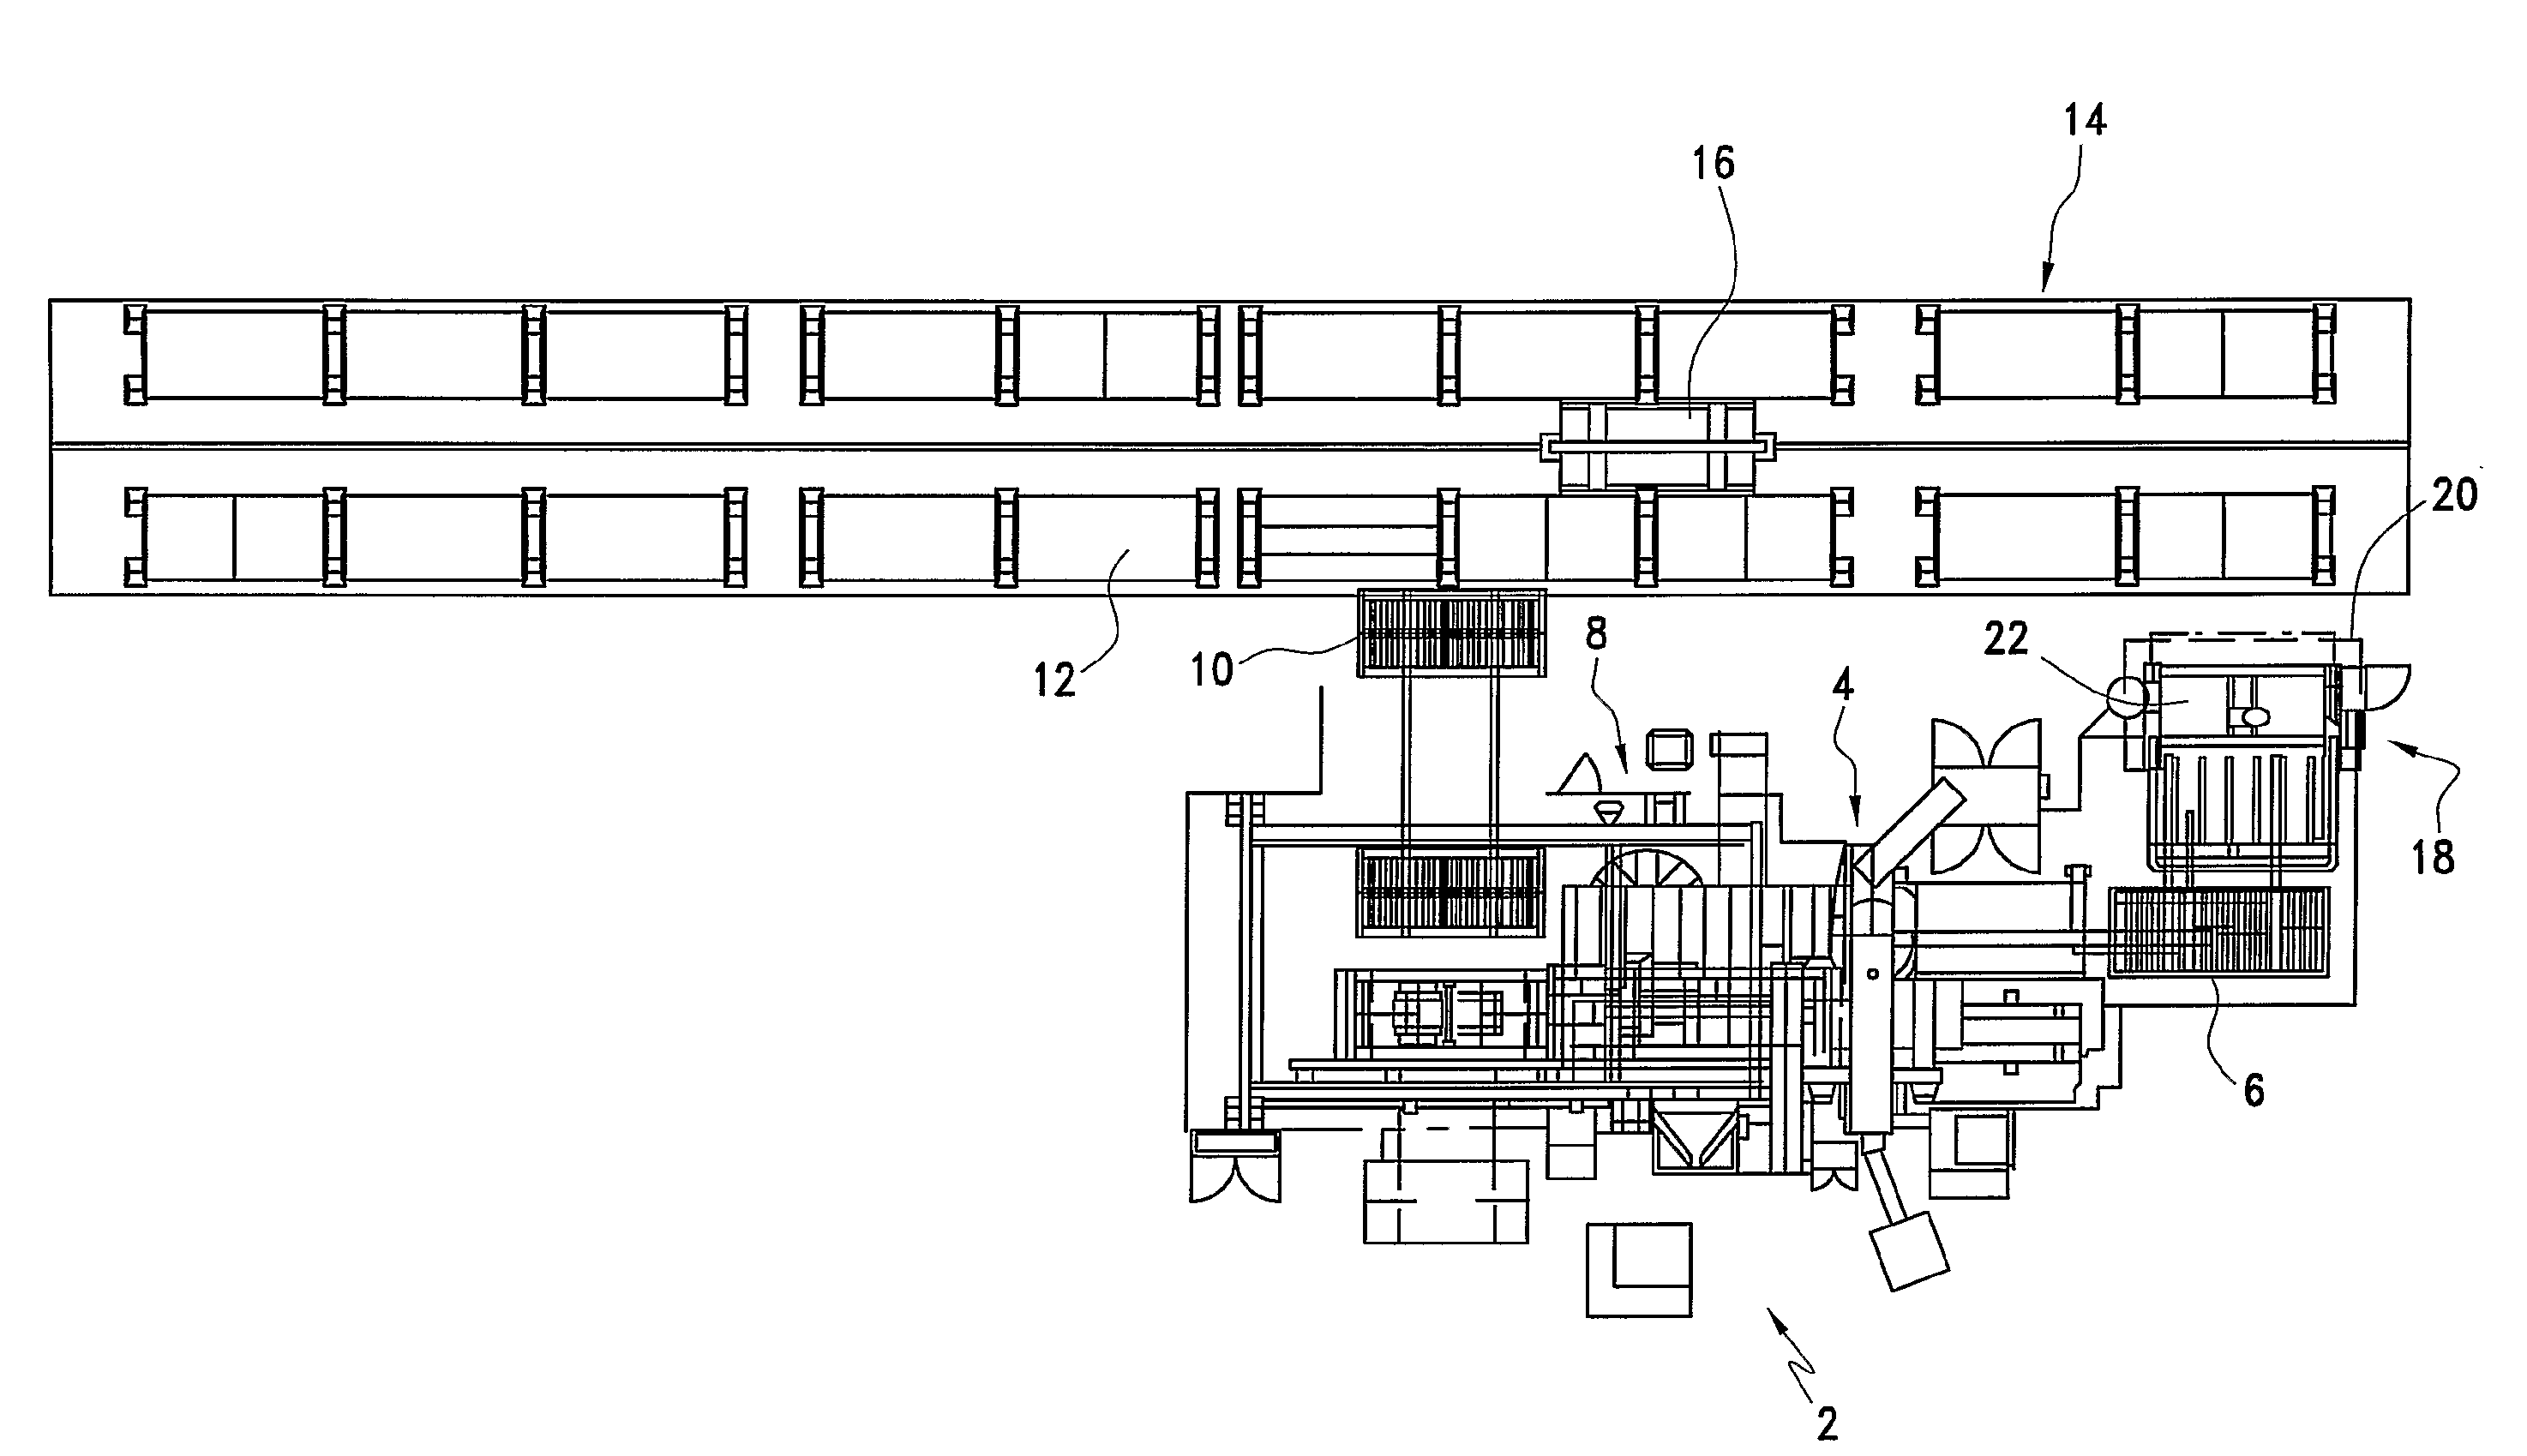 Apparatus and method for handling short run quick changeover fabrication jobs